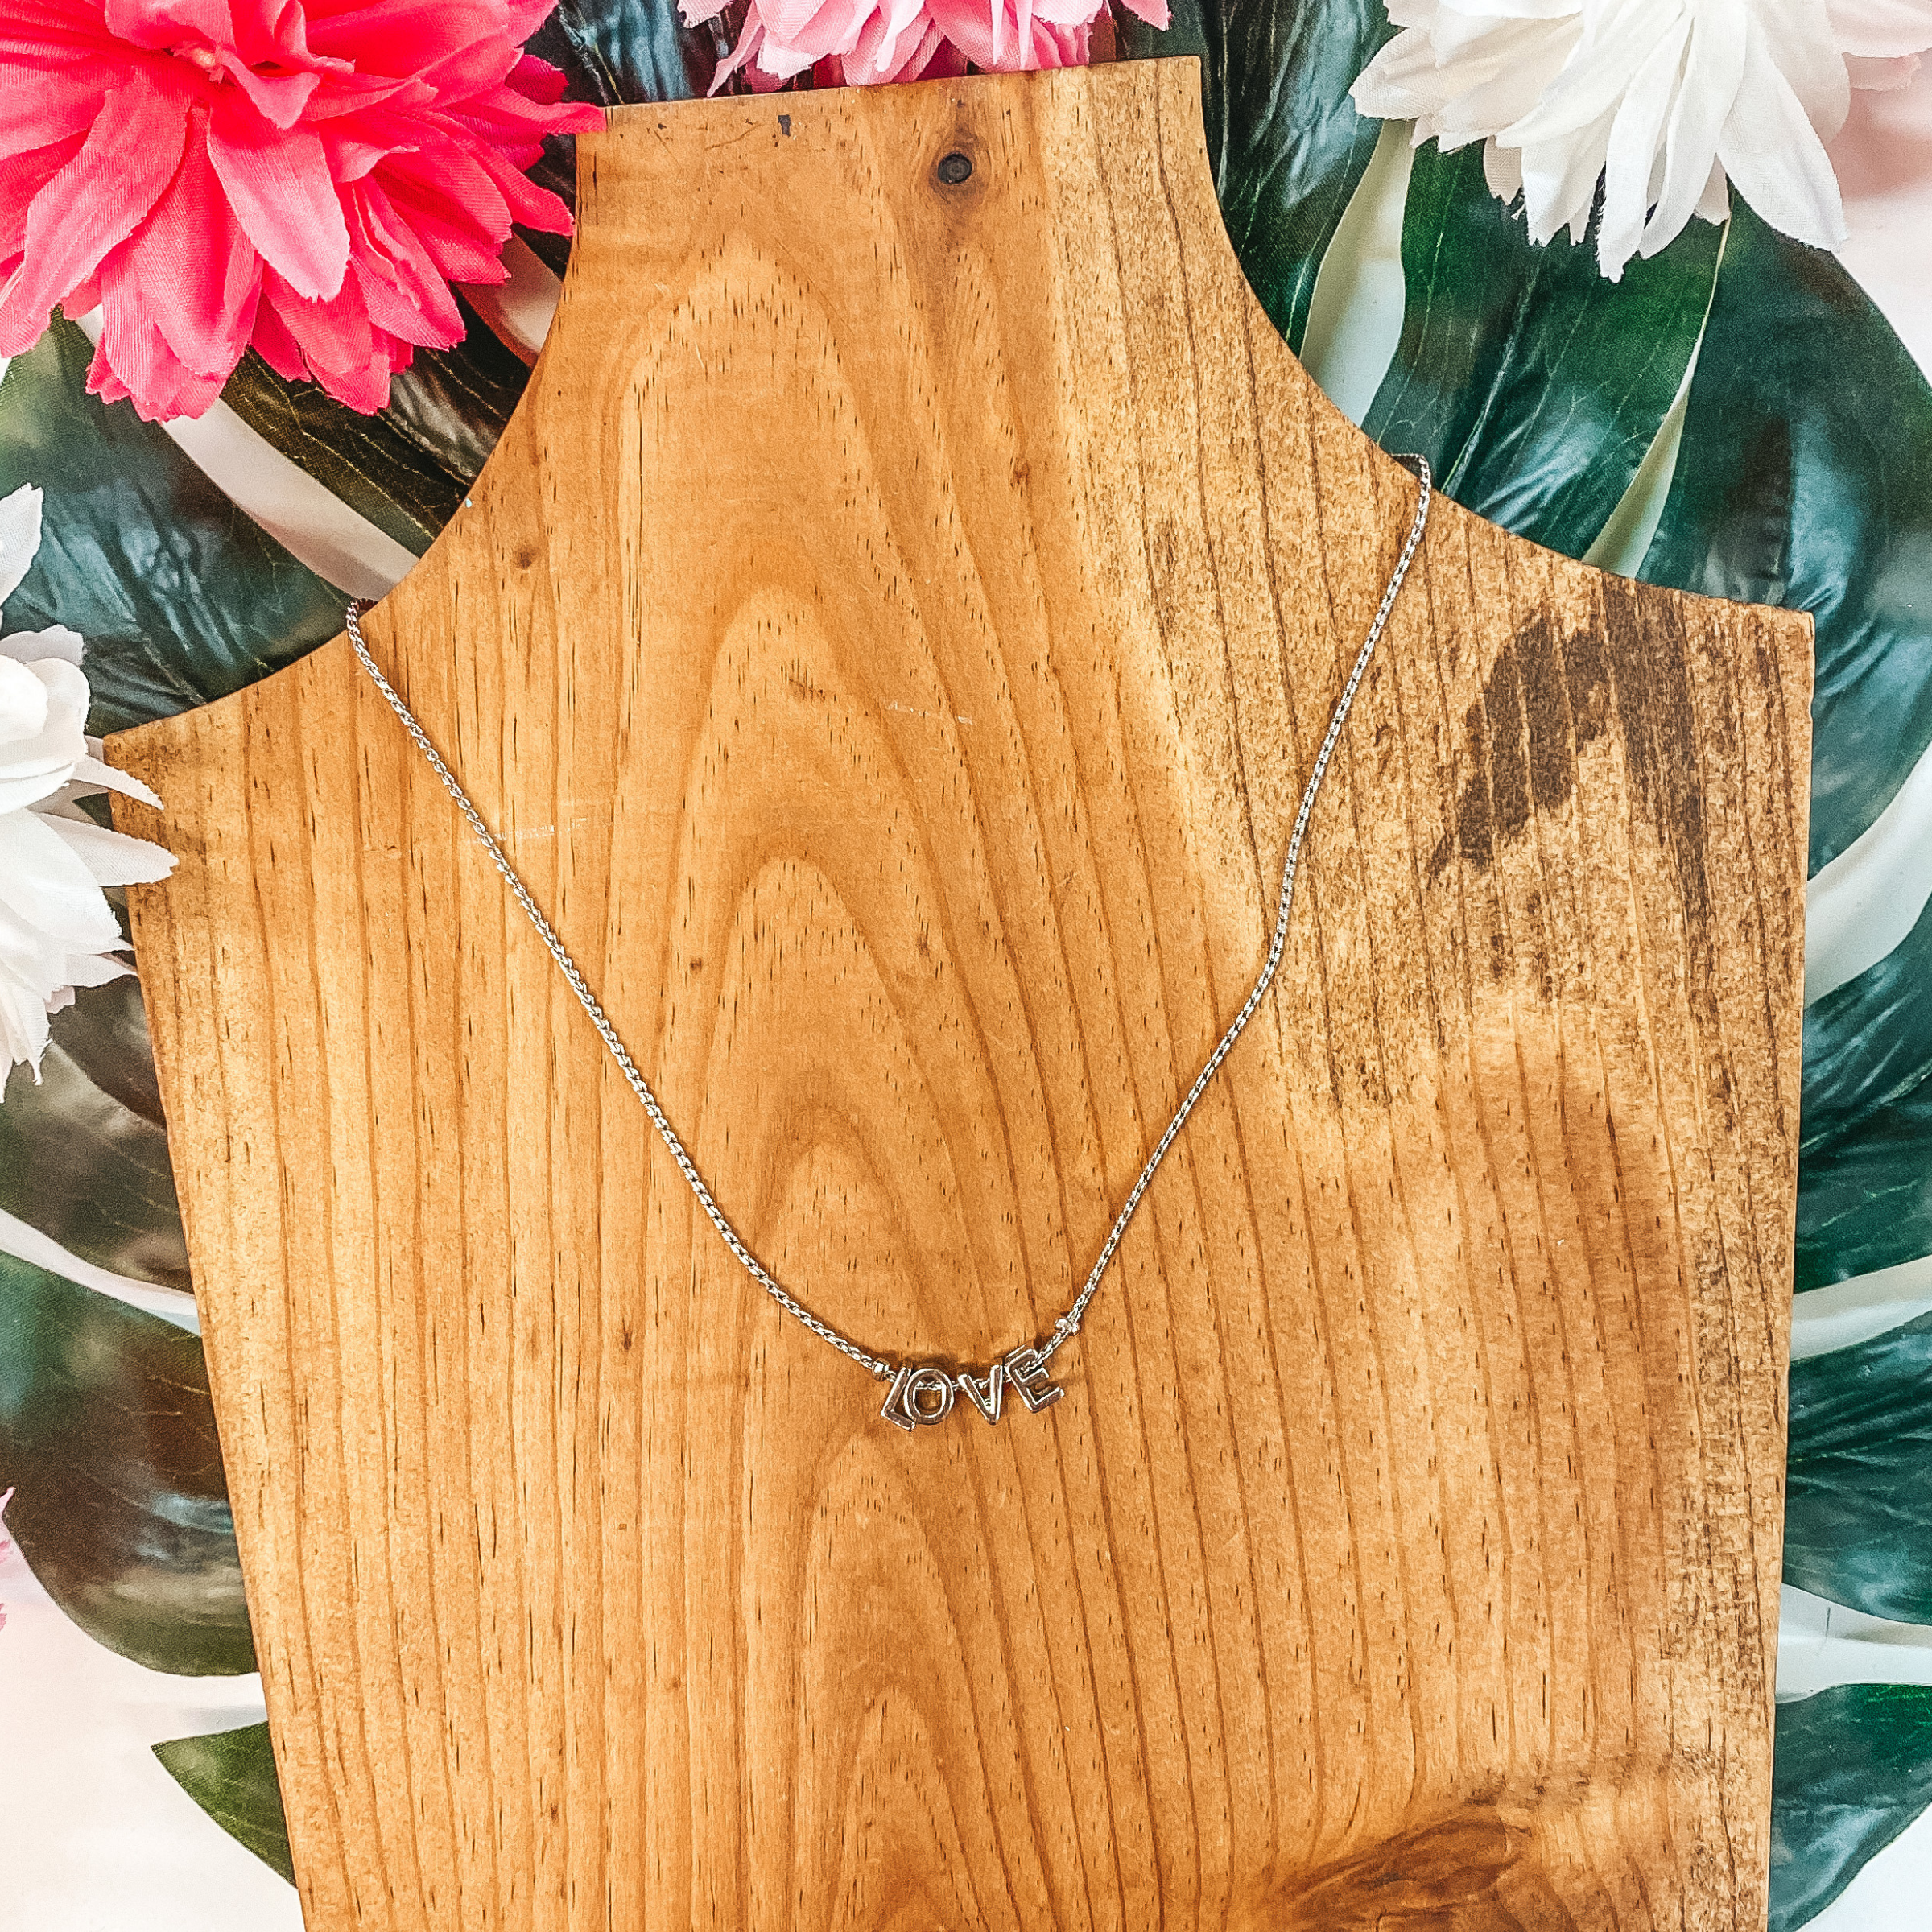 L O V E Pendant Necklace in Silver - Giddy Up Glamour Boutique